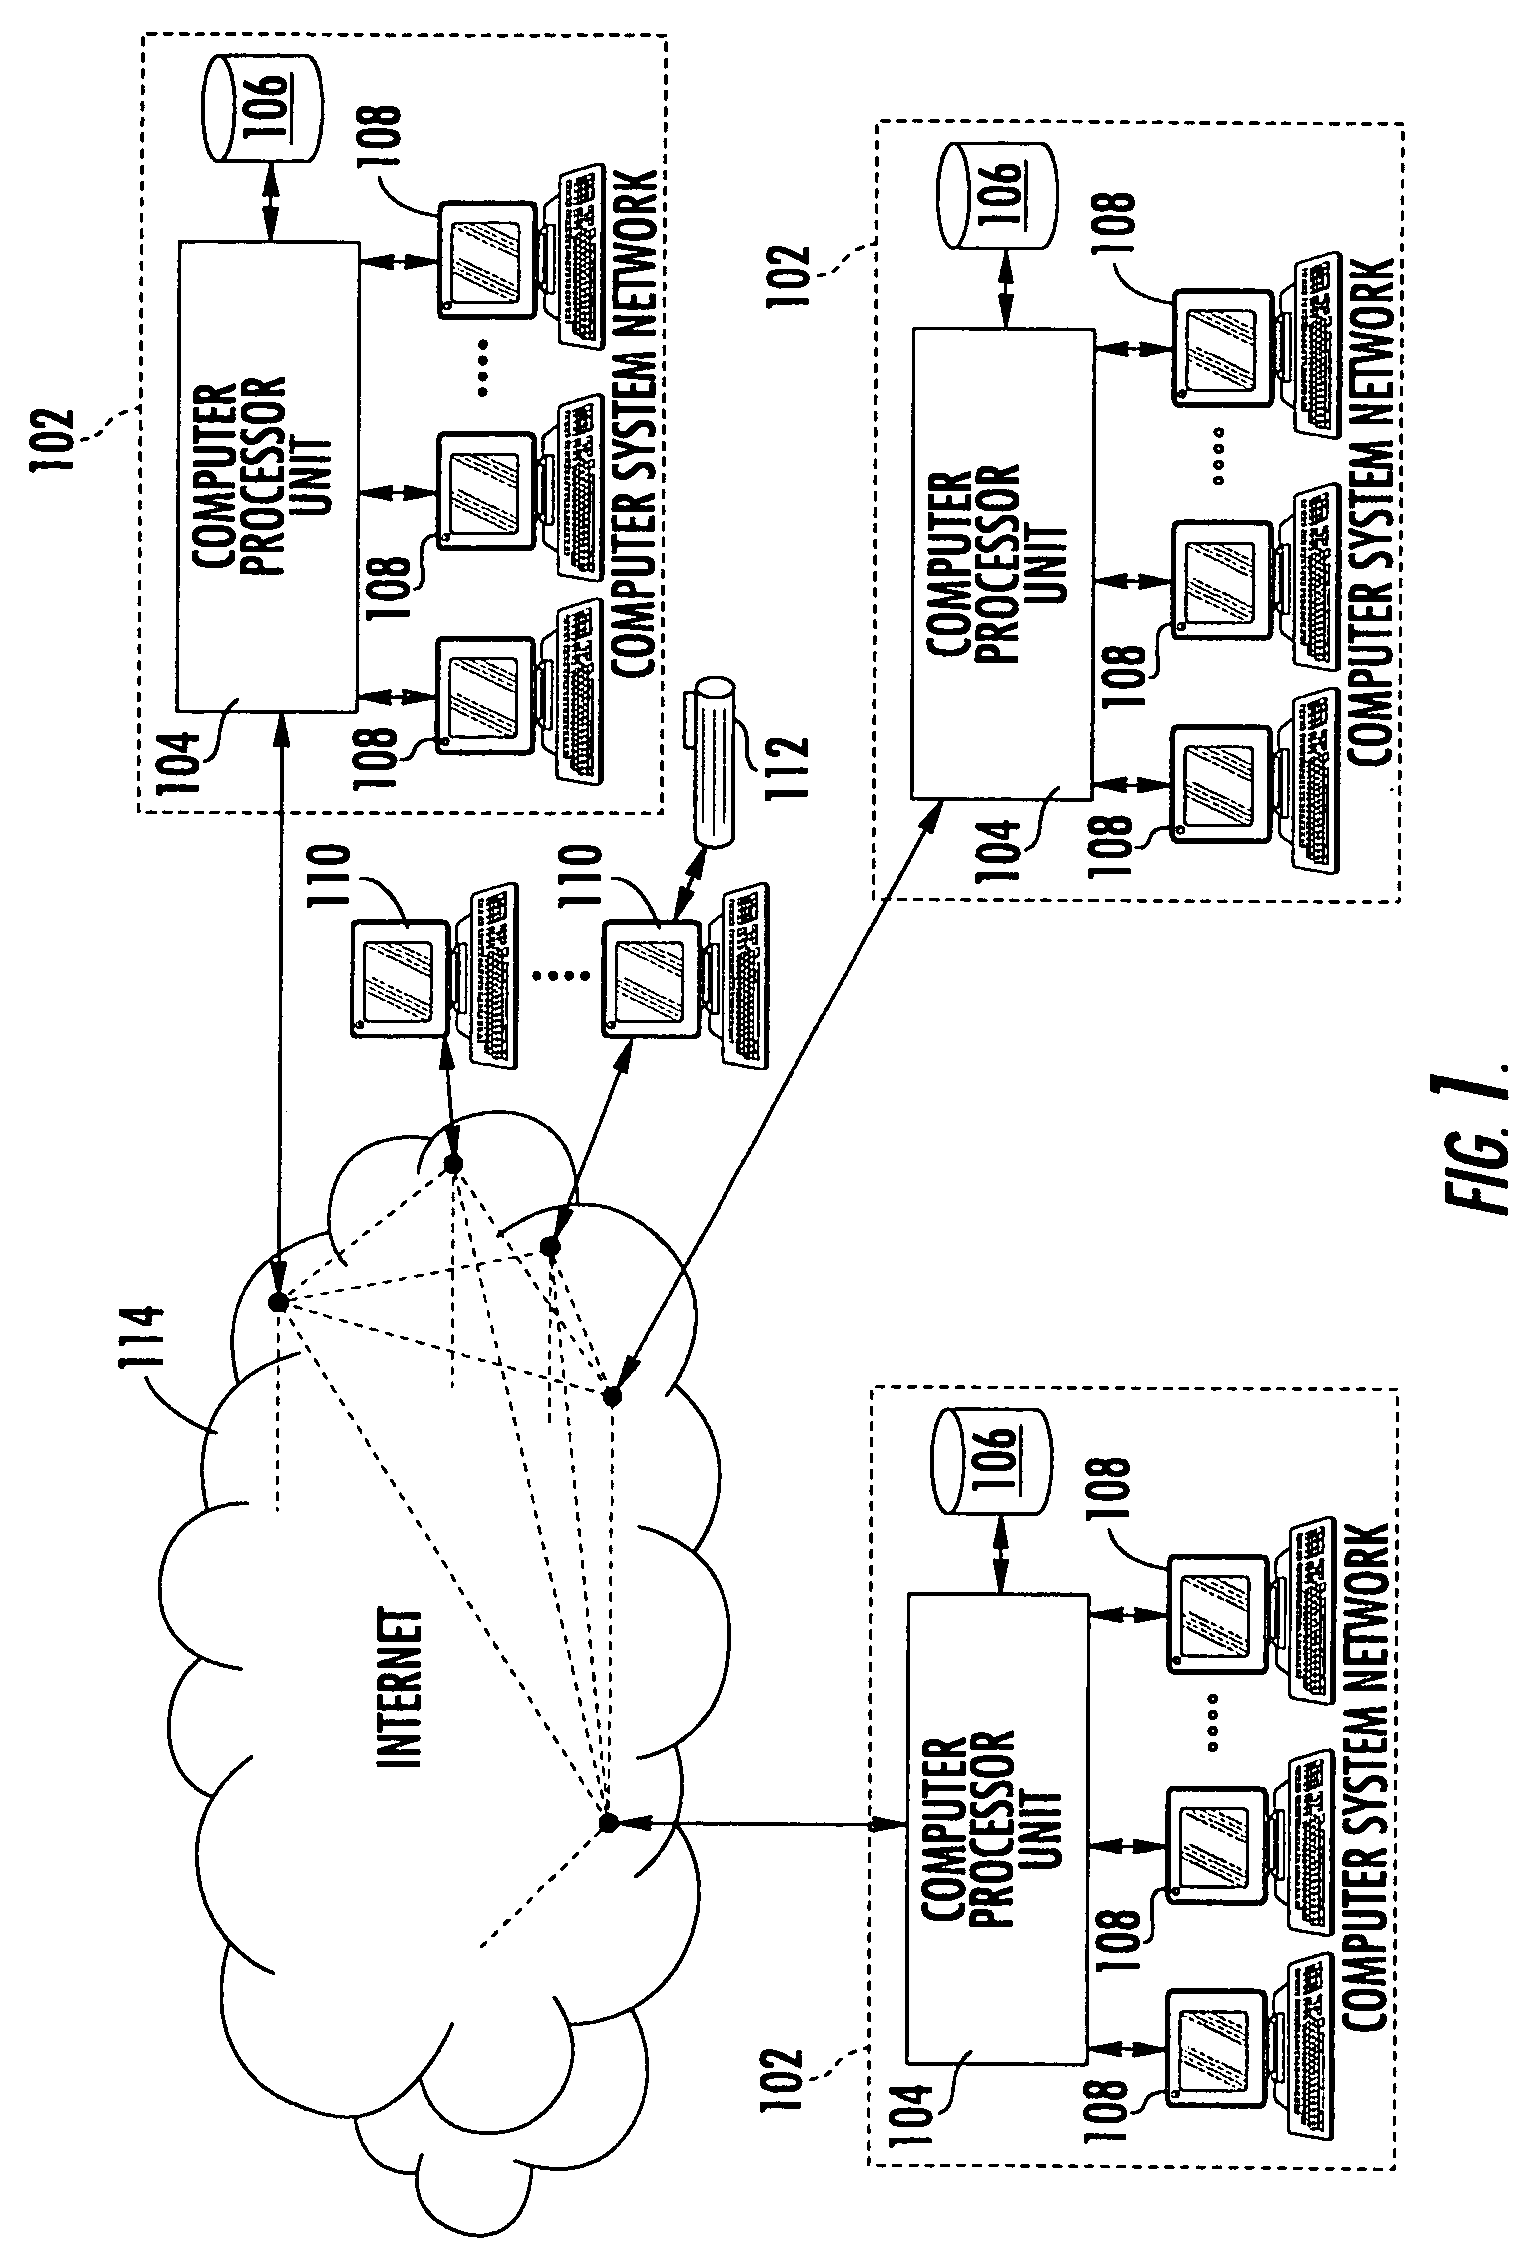 System and method for signaling quality and integrity of data content